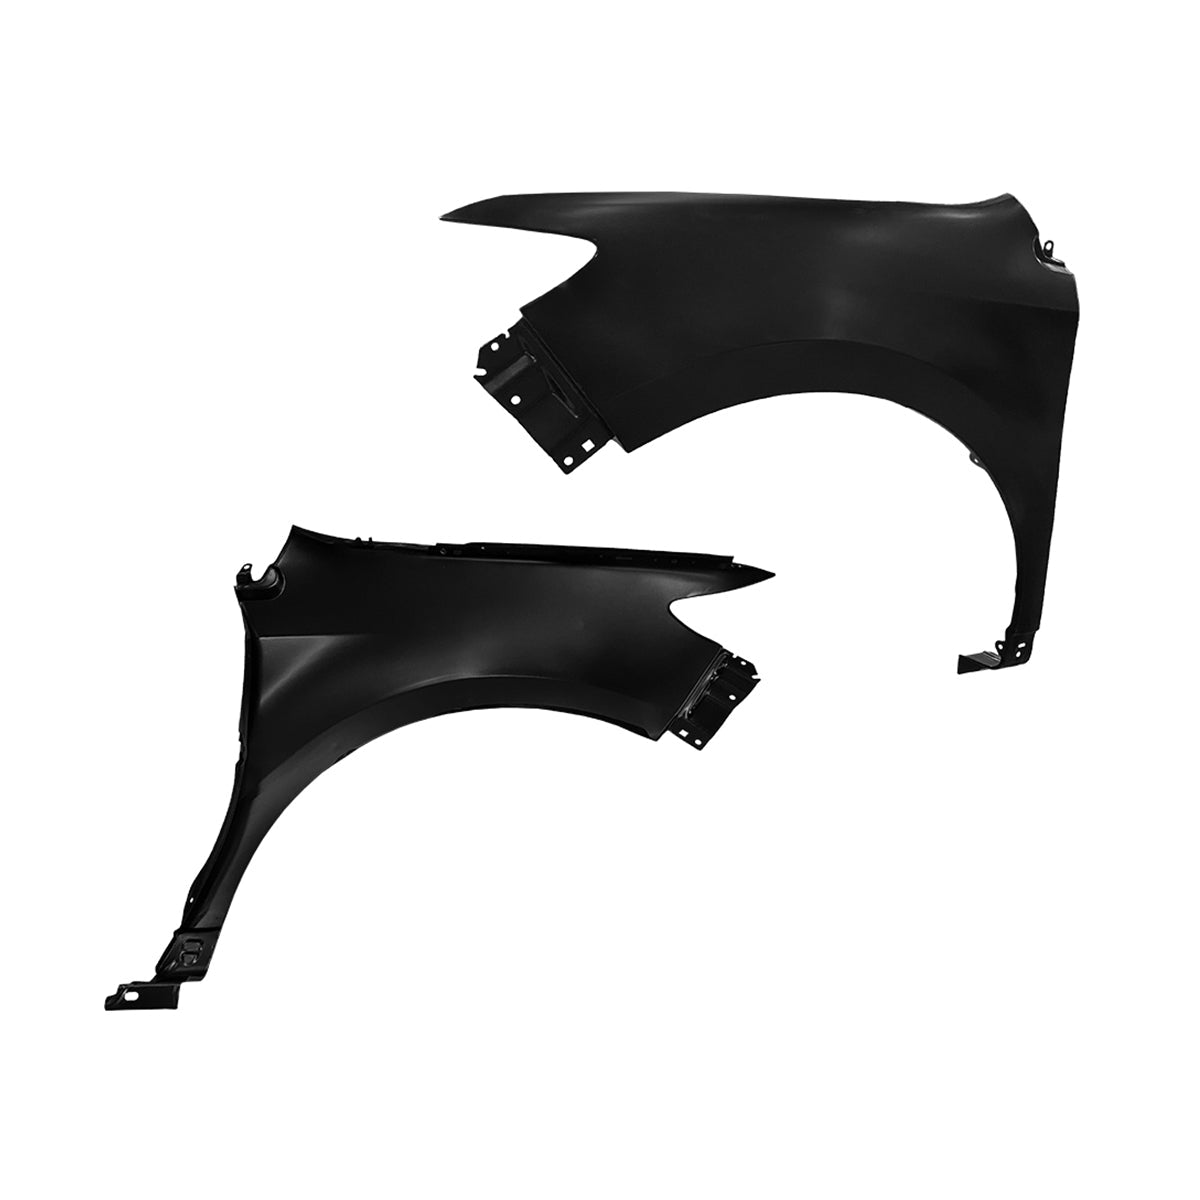 Replacement FRONT FENDER, LH, 2011-2014 Ford Edge, CT4Z16006A, FO1240285, (Steel)